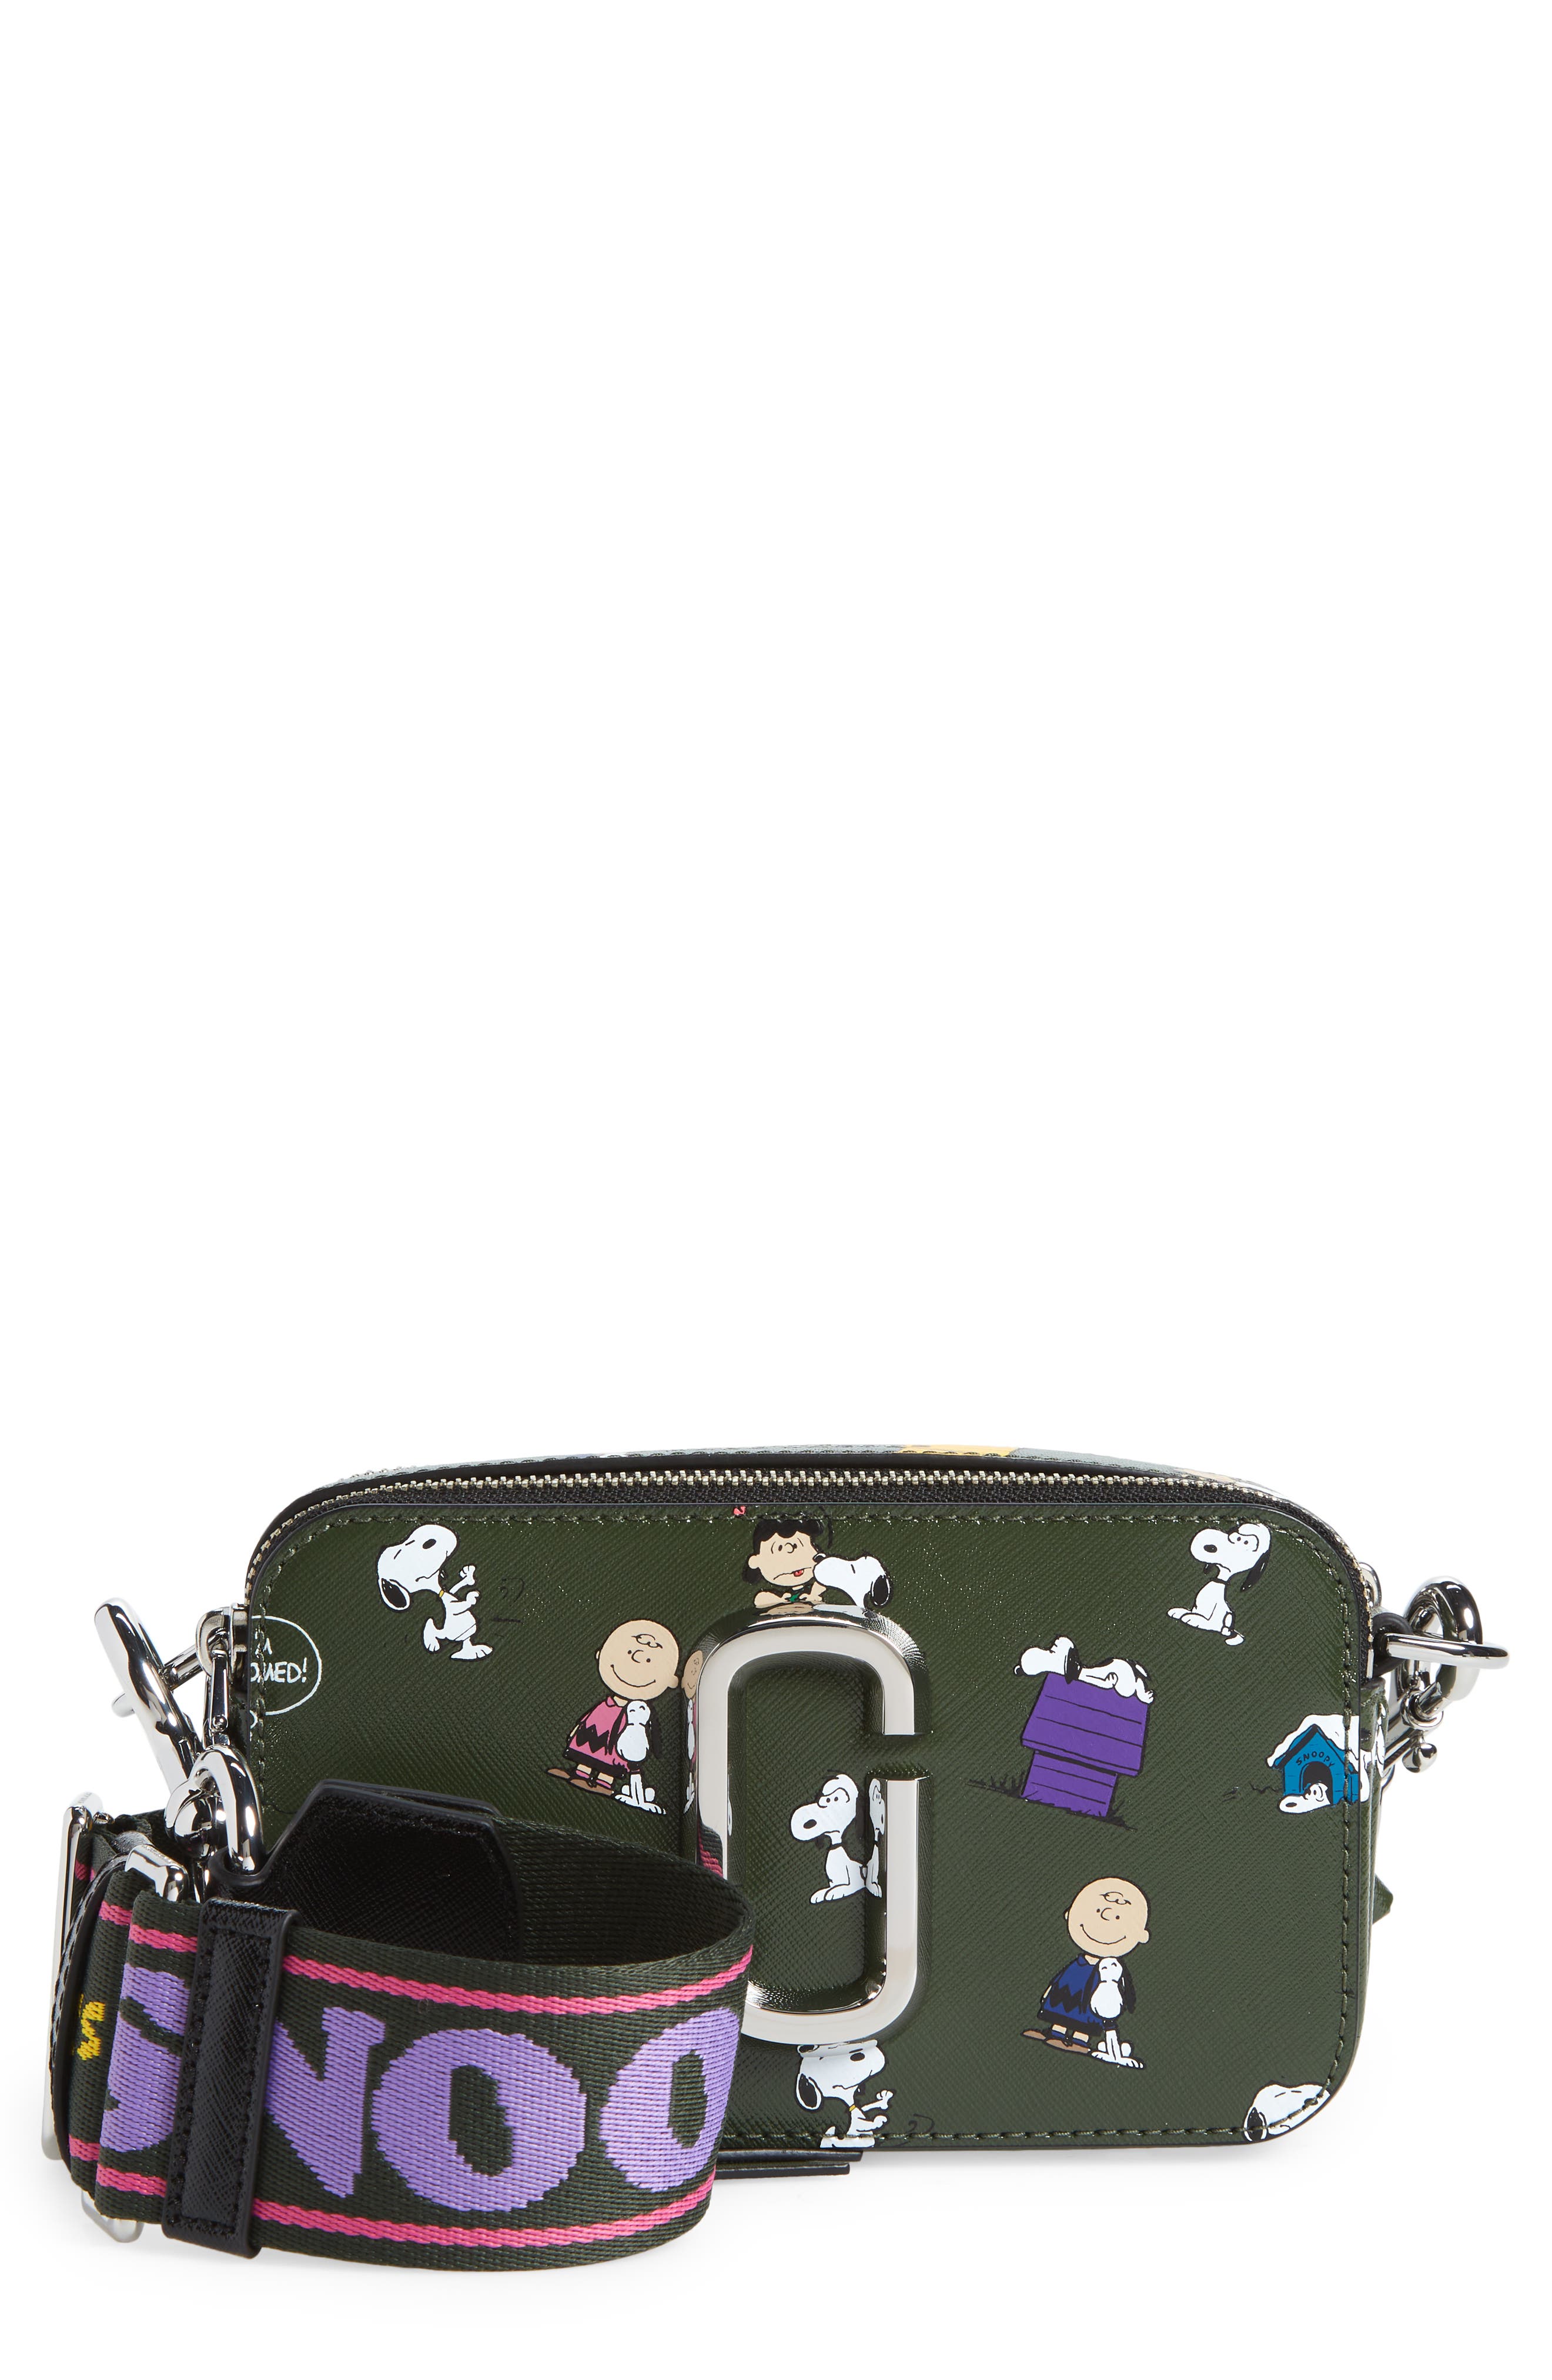 PEANUTS x MARC JACOBS THE SMALL TRAVELER BAG GREEN MULTI Tote Bag